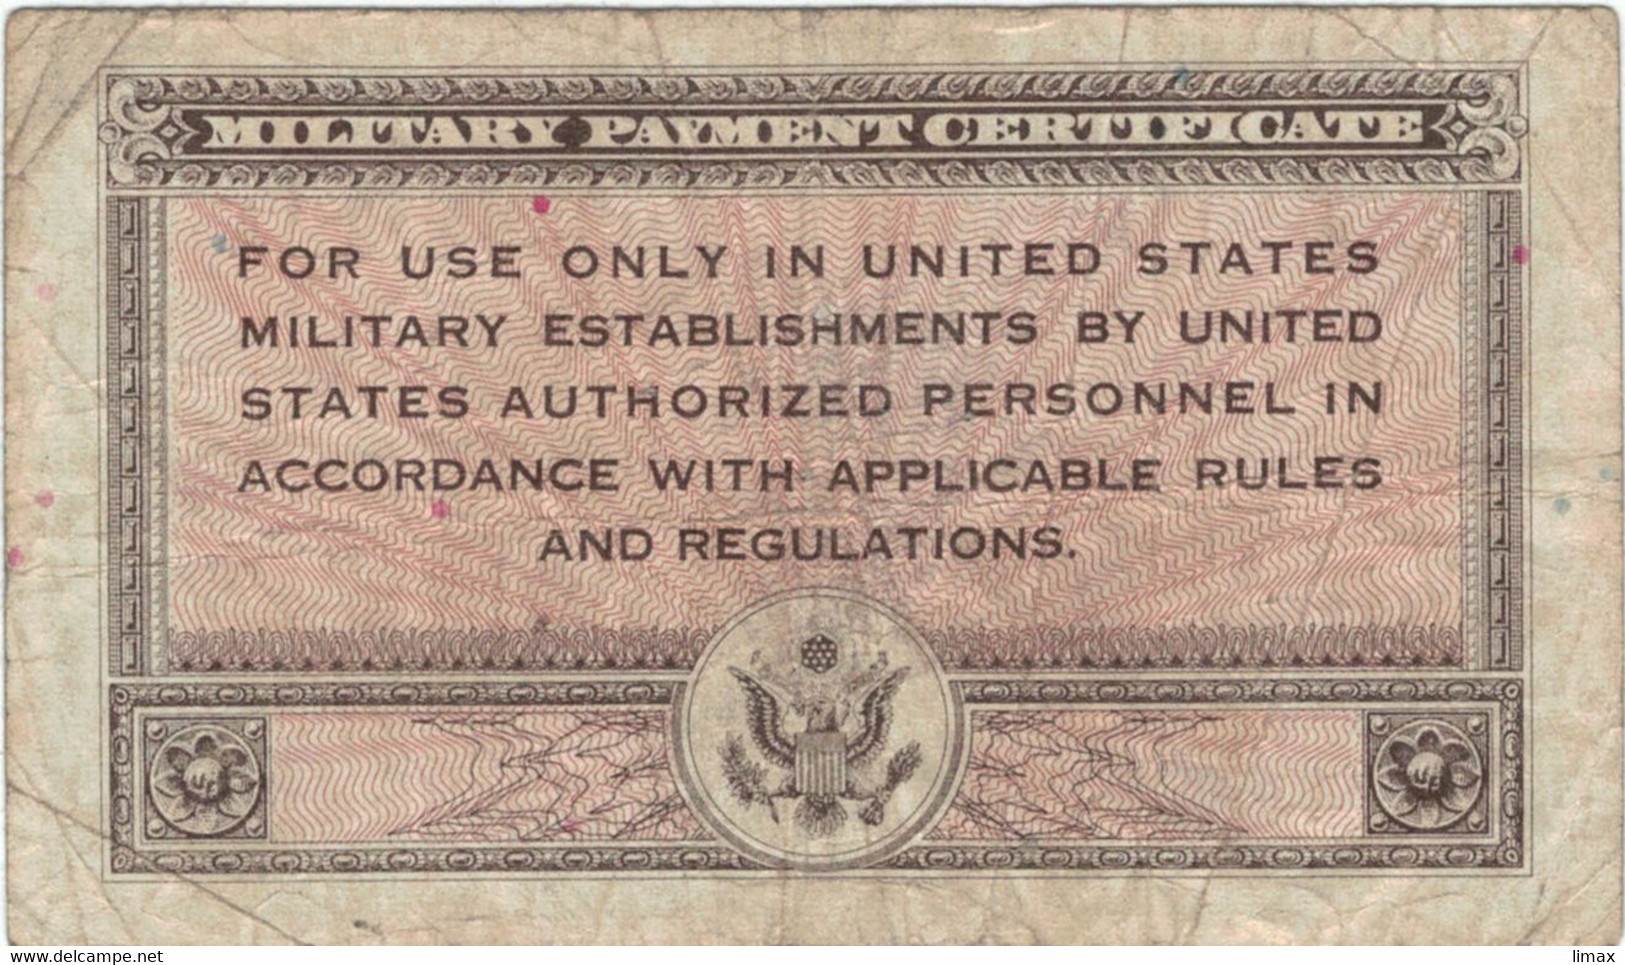 MILITARIA - MILITARY PAYMENT CERTIFICATE SERIE 461 - 1947 NON DATE - ONE 1 DOLLAR A03884712A - 1946 - Serie 461